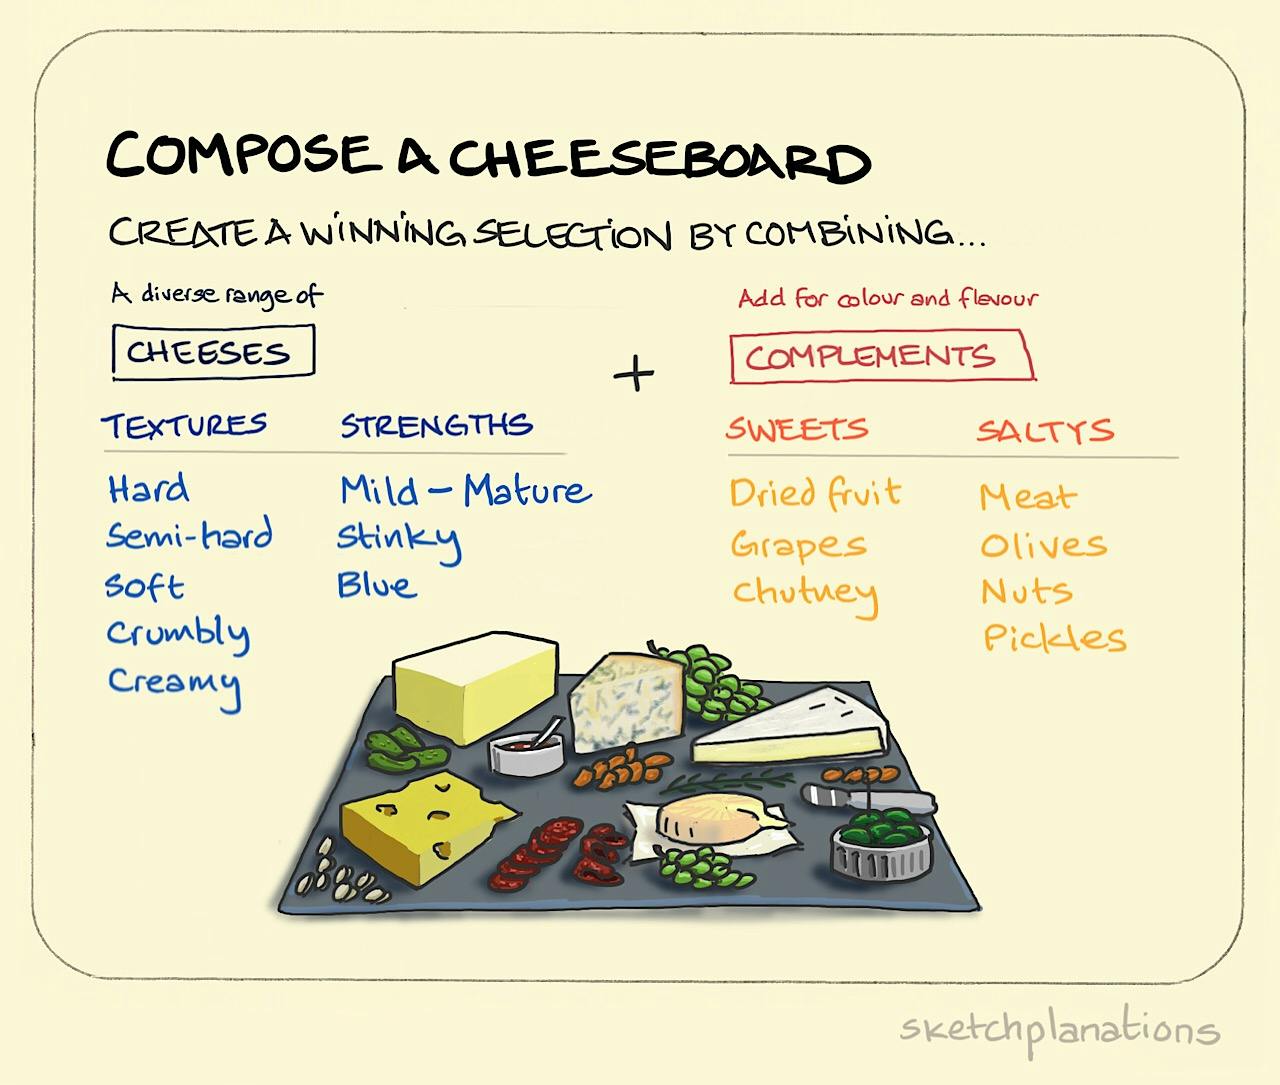 Compose a cheeseboard illustration: a delicious-looking platter is presented with a wide selection of cheeses; soft, hard, round, blue-veined and riddled with holes. In amongst the cheeses we find a colourful range of items to complement flavours; olives, nuts, pickles, cured meats and dried fruit. 